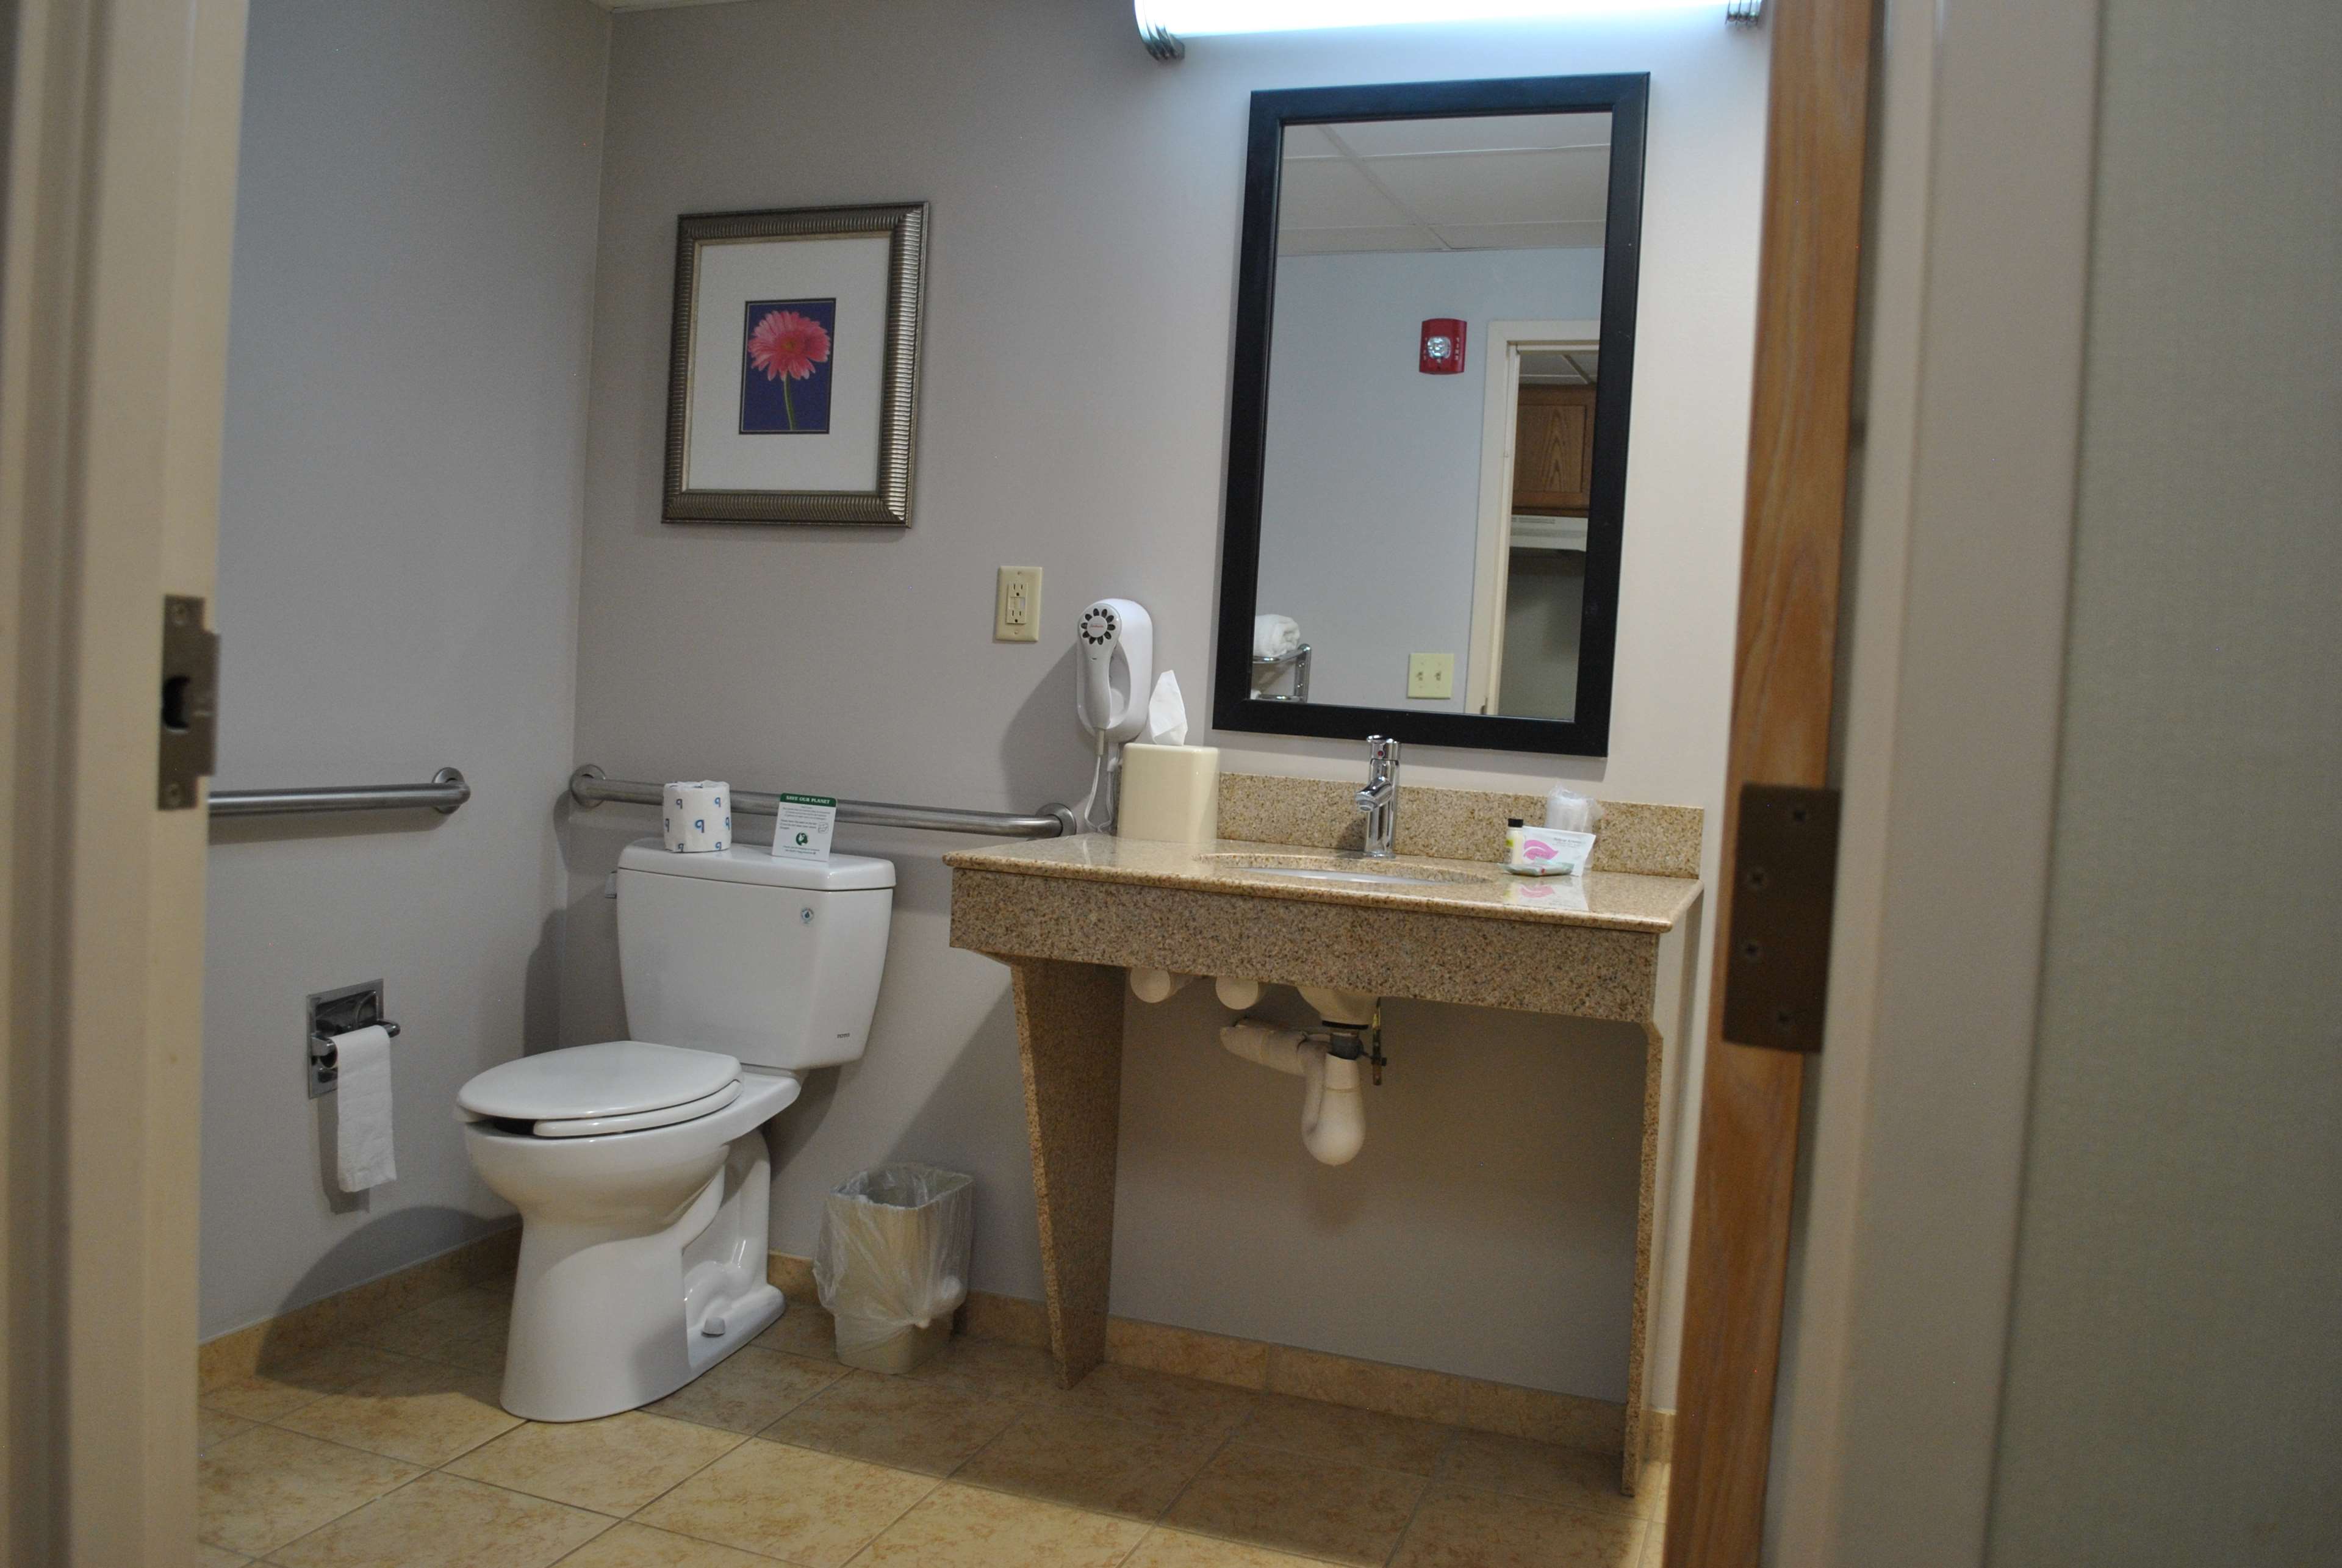 Mobility Accessible Bathroom